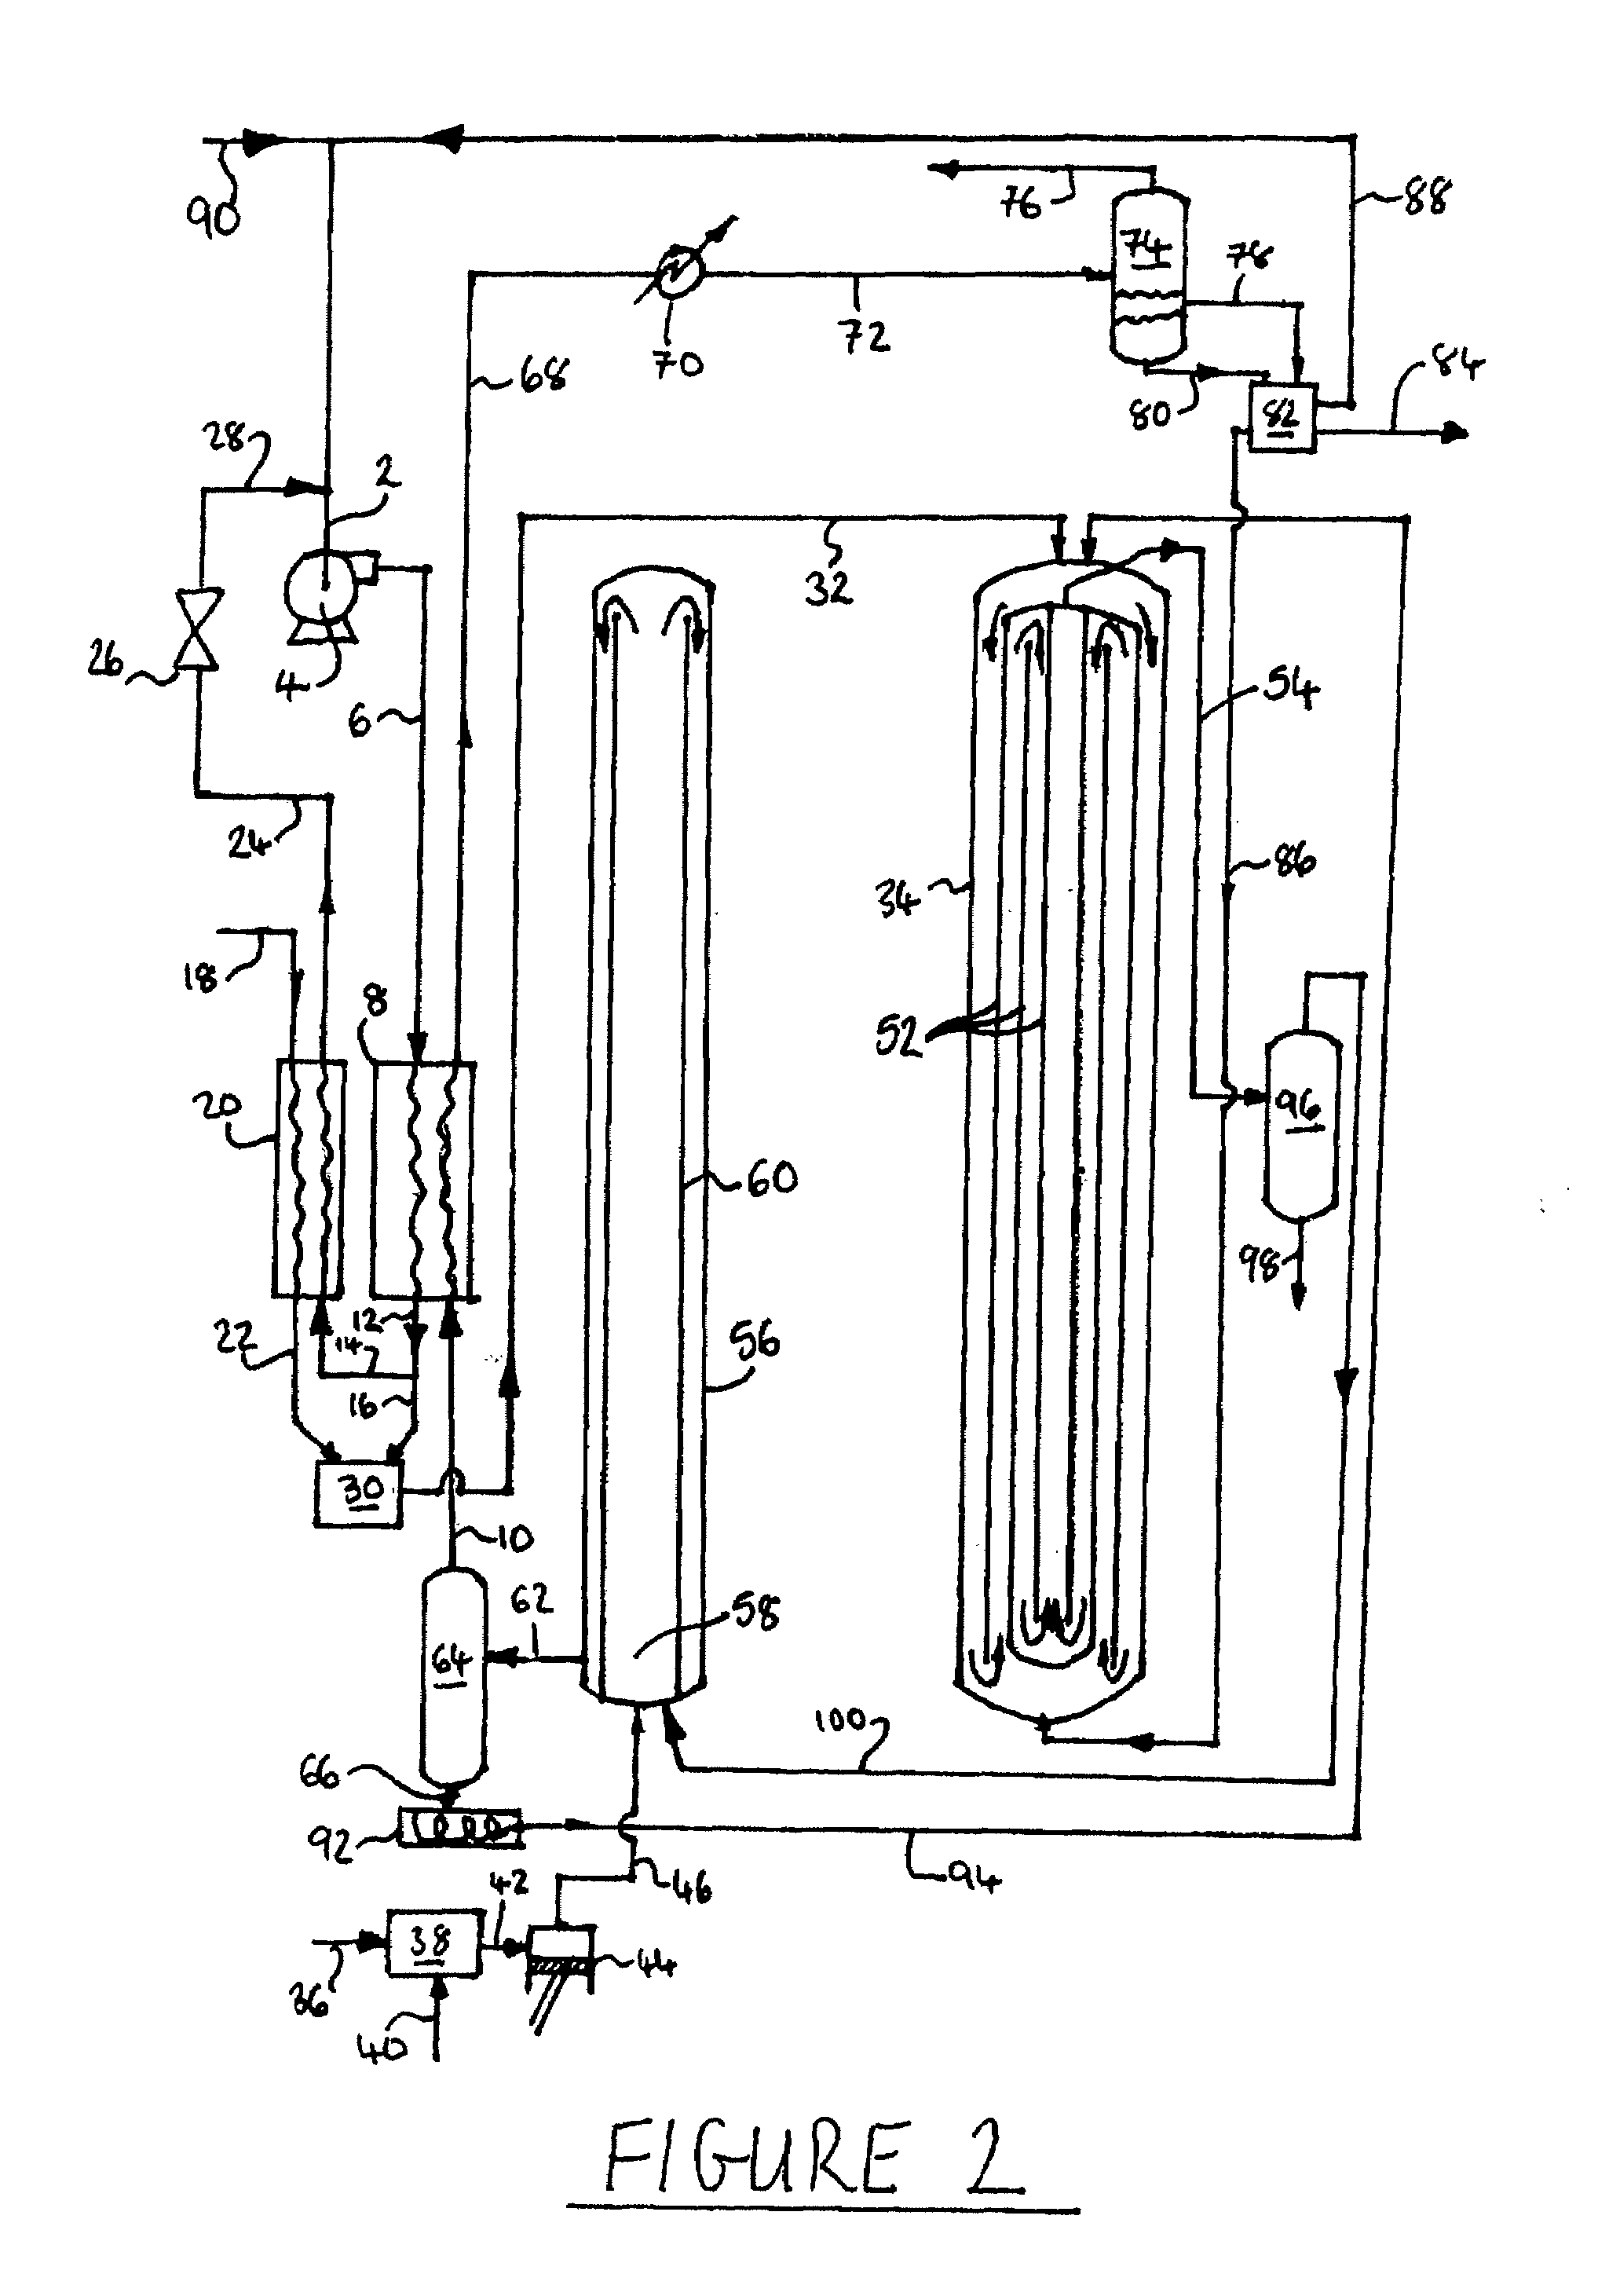 Process and apparatus for upgrading coal using supercritical water